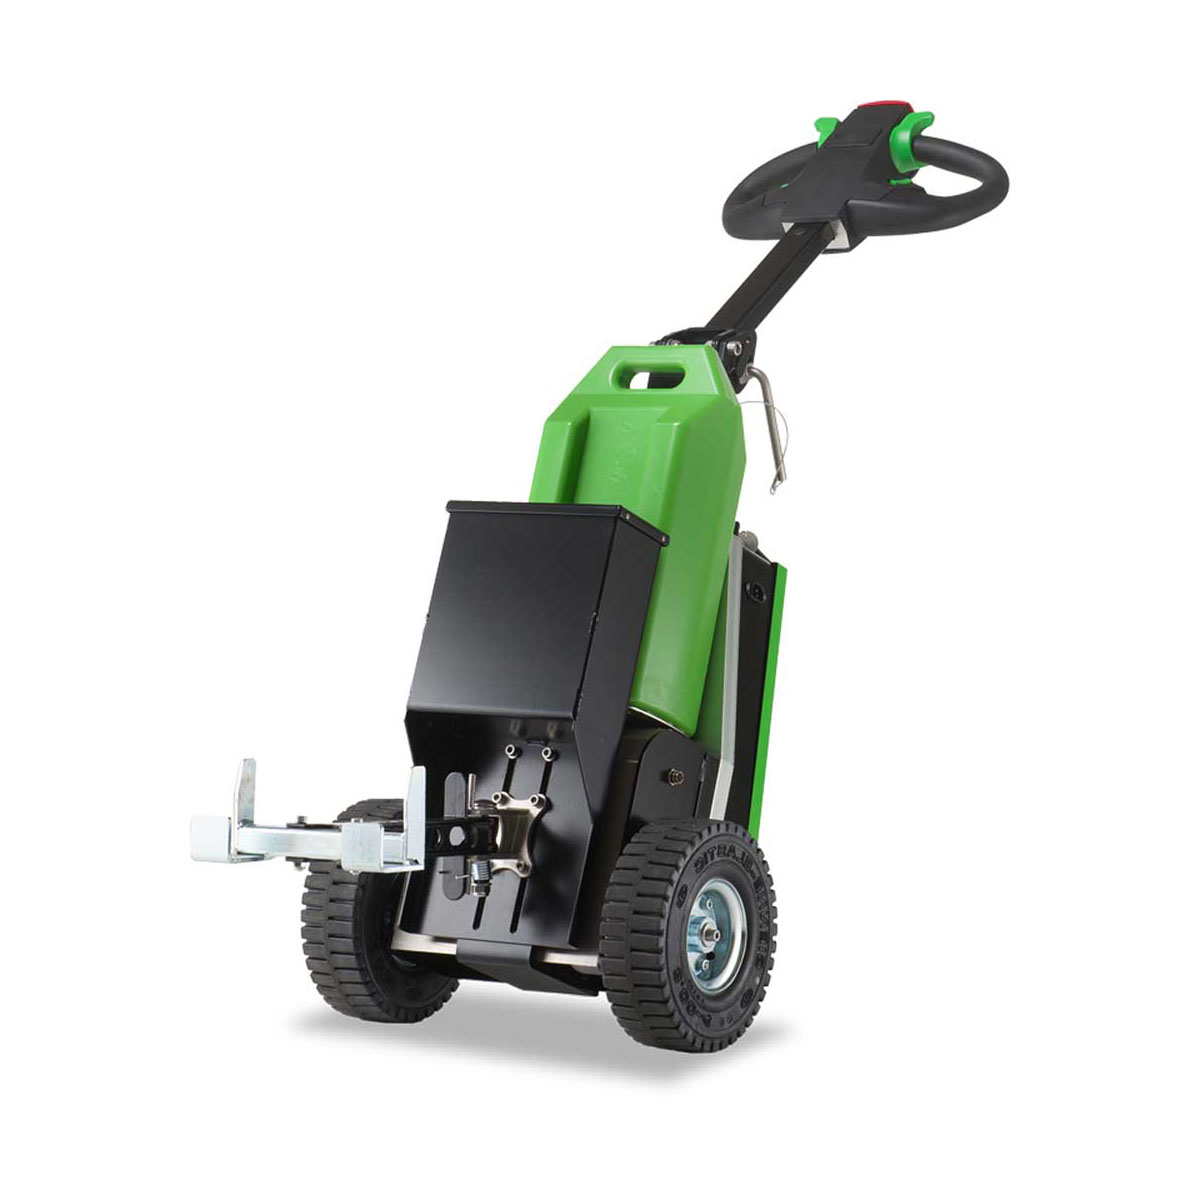 Buy Battery Tug  in Electric Tugs from Movexx available at Astrolift NZ